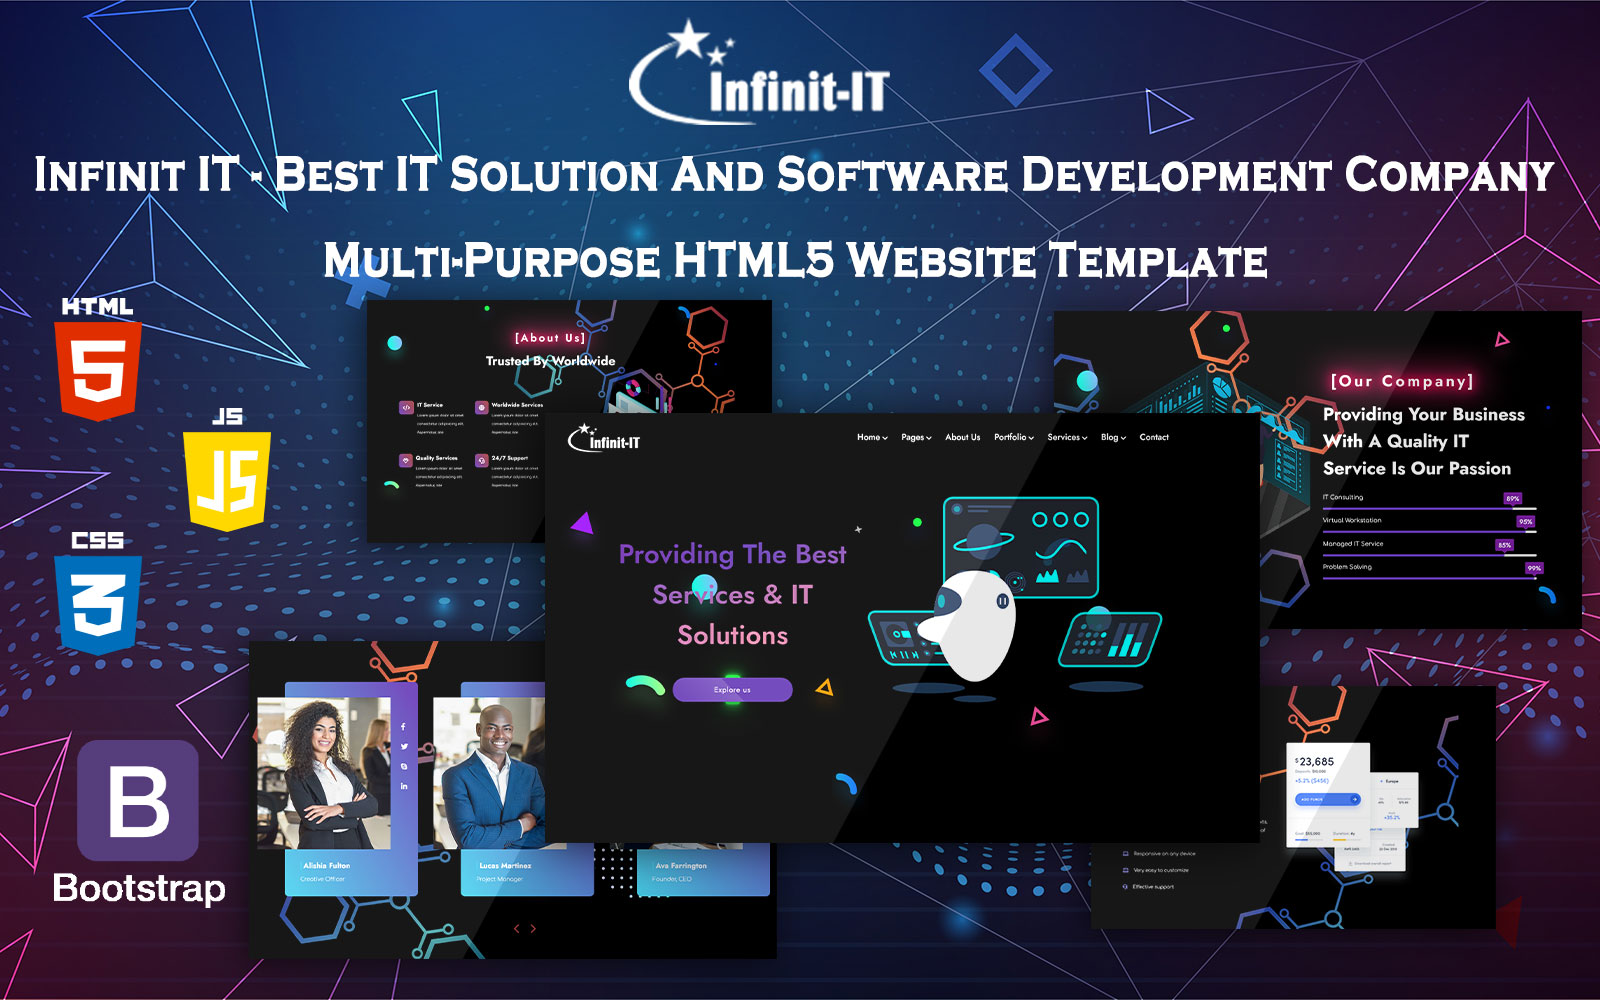 Infinit IT - Best IT Solution And Software Development Company Multi-Purpose HTML5 Website Template